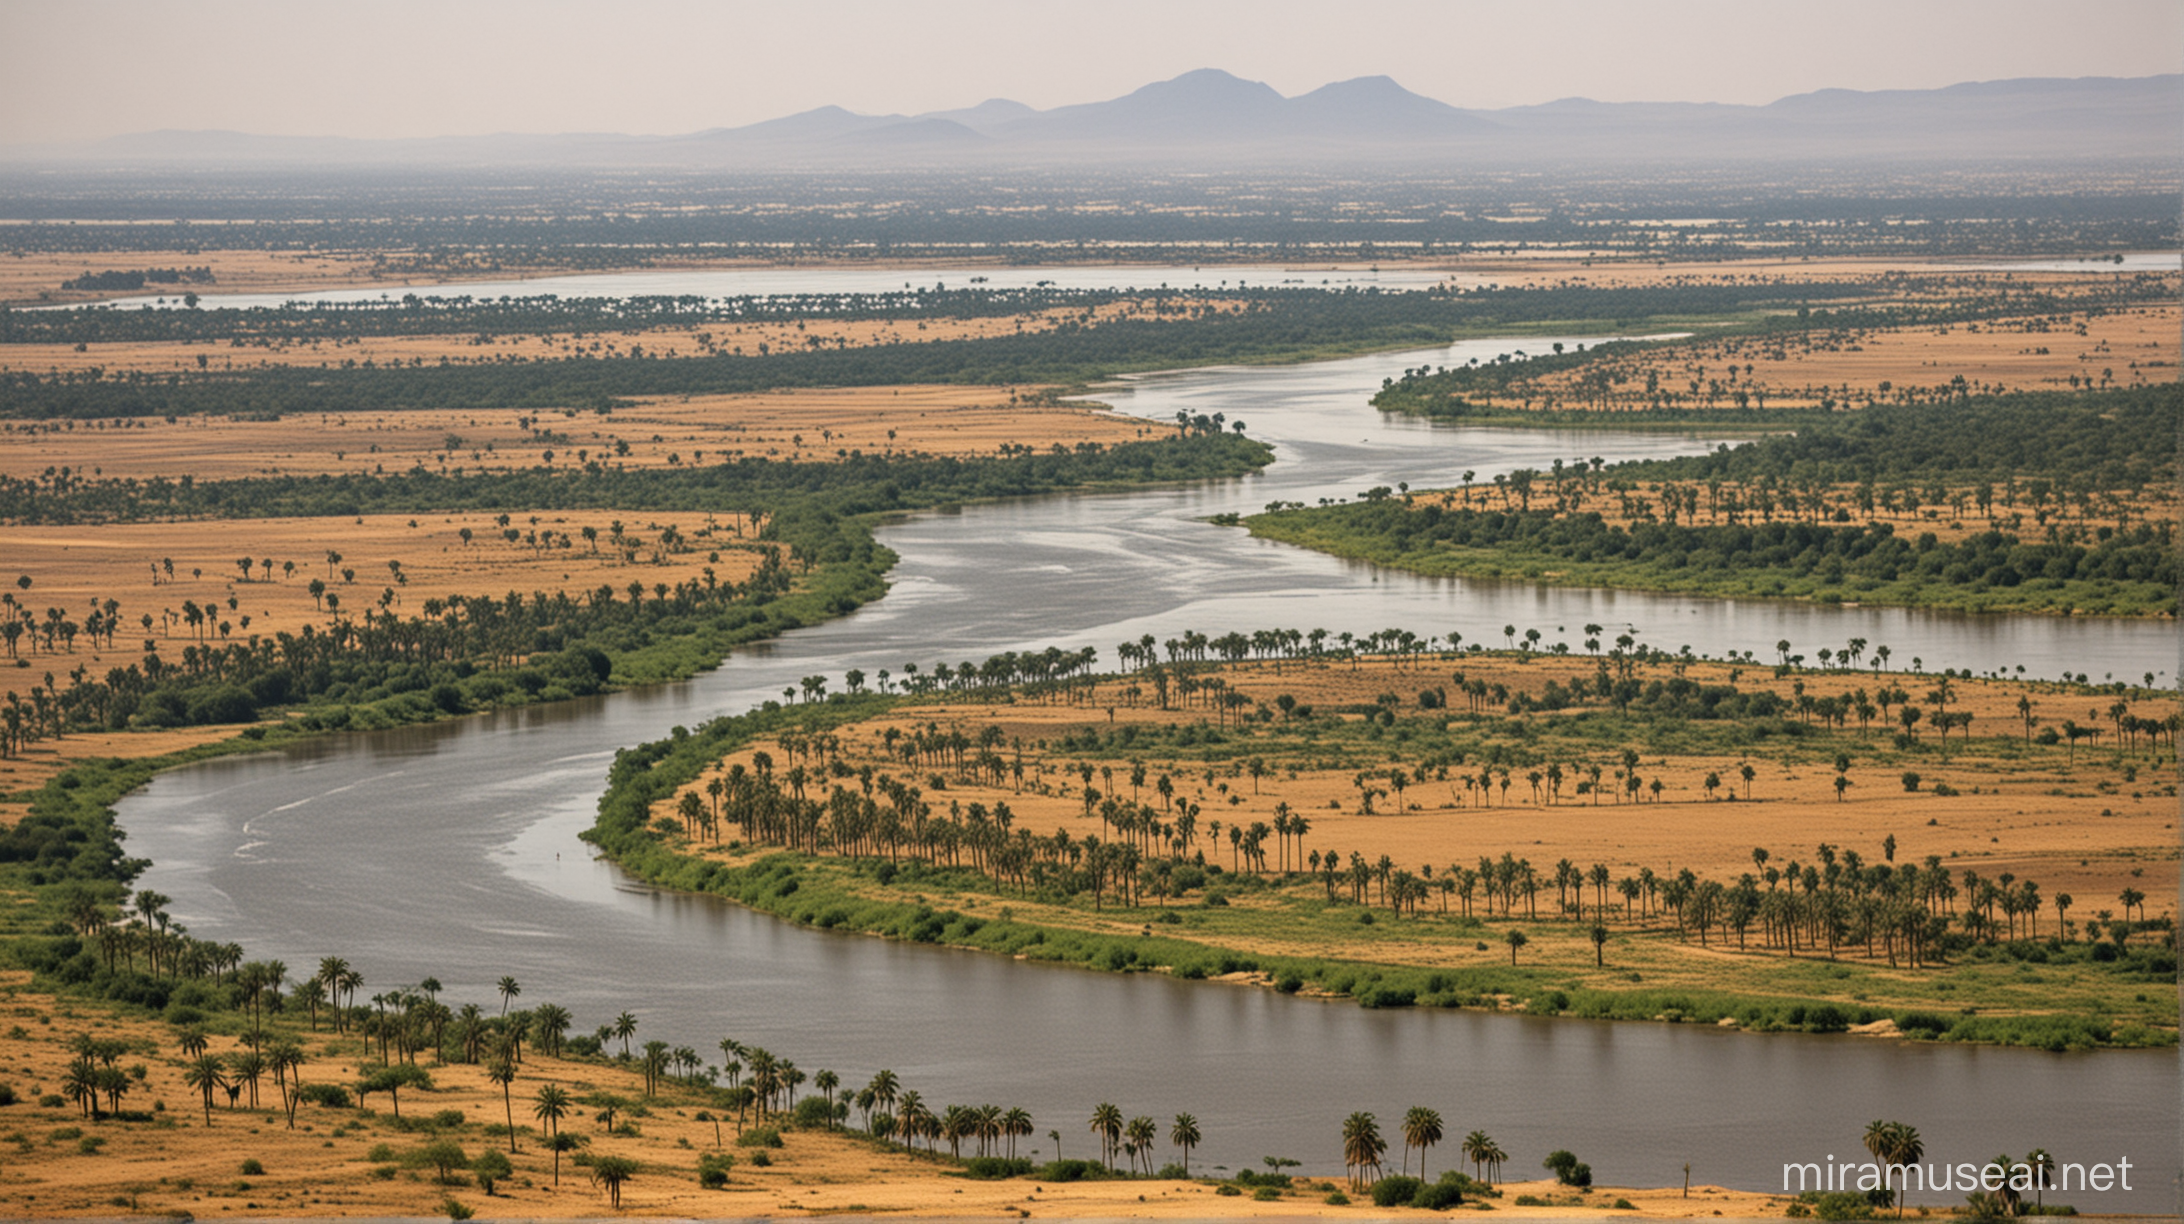 Nile River (Africa)